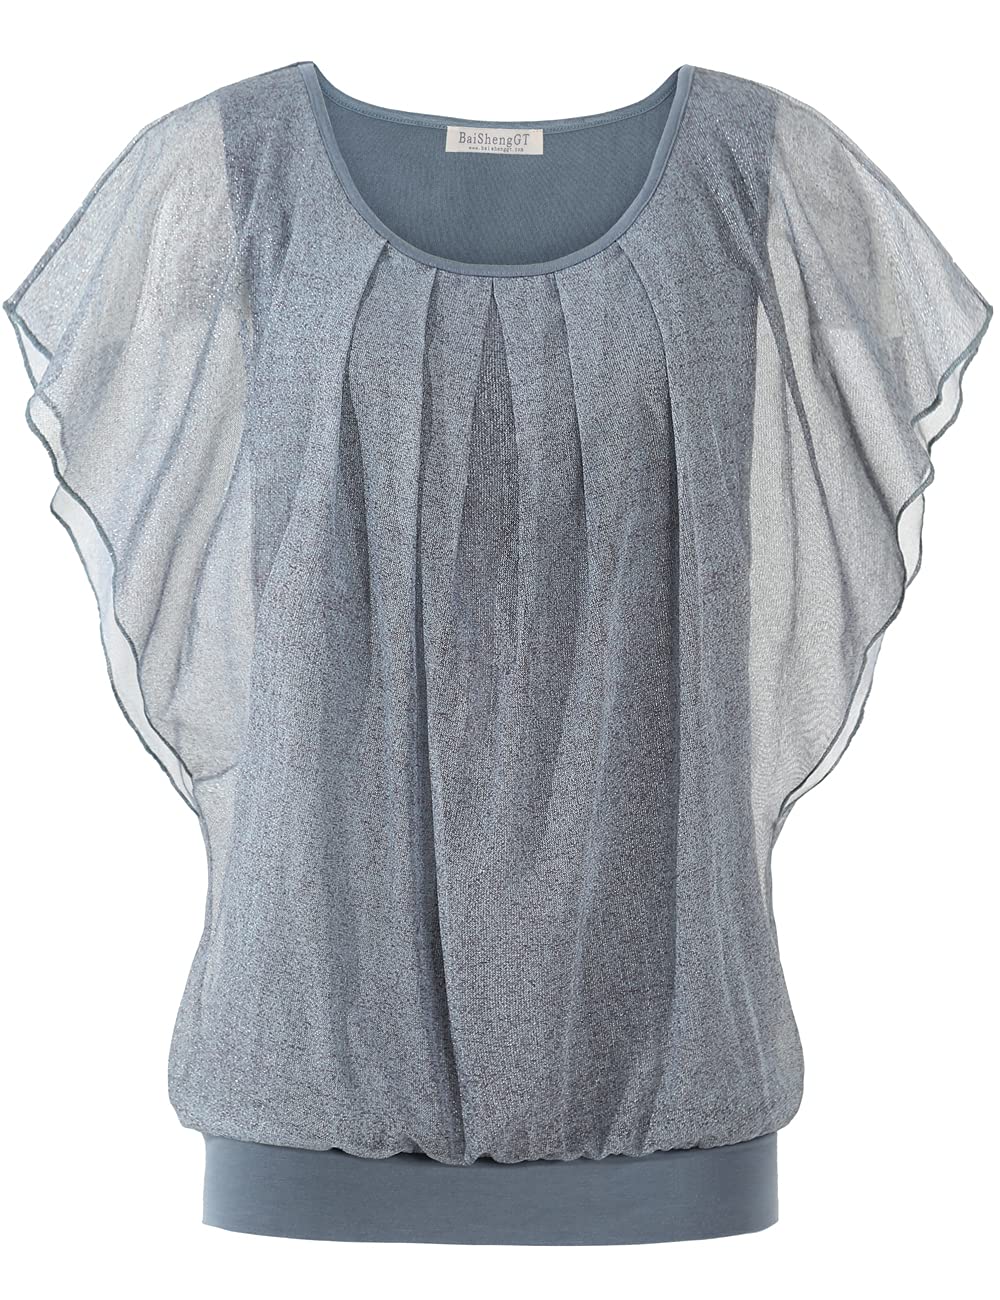 BAISHENGGT Unique Grey Women's Printed Flouncing Flared Short Sleeve Mesh Blouse Tops